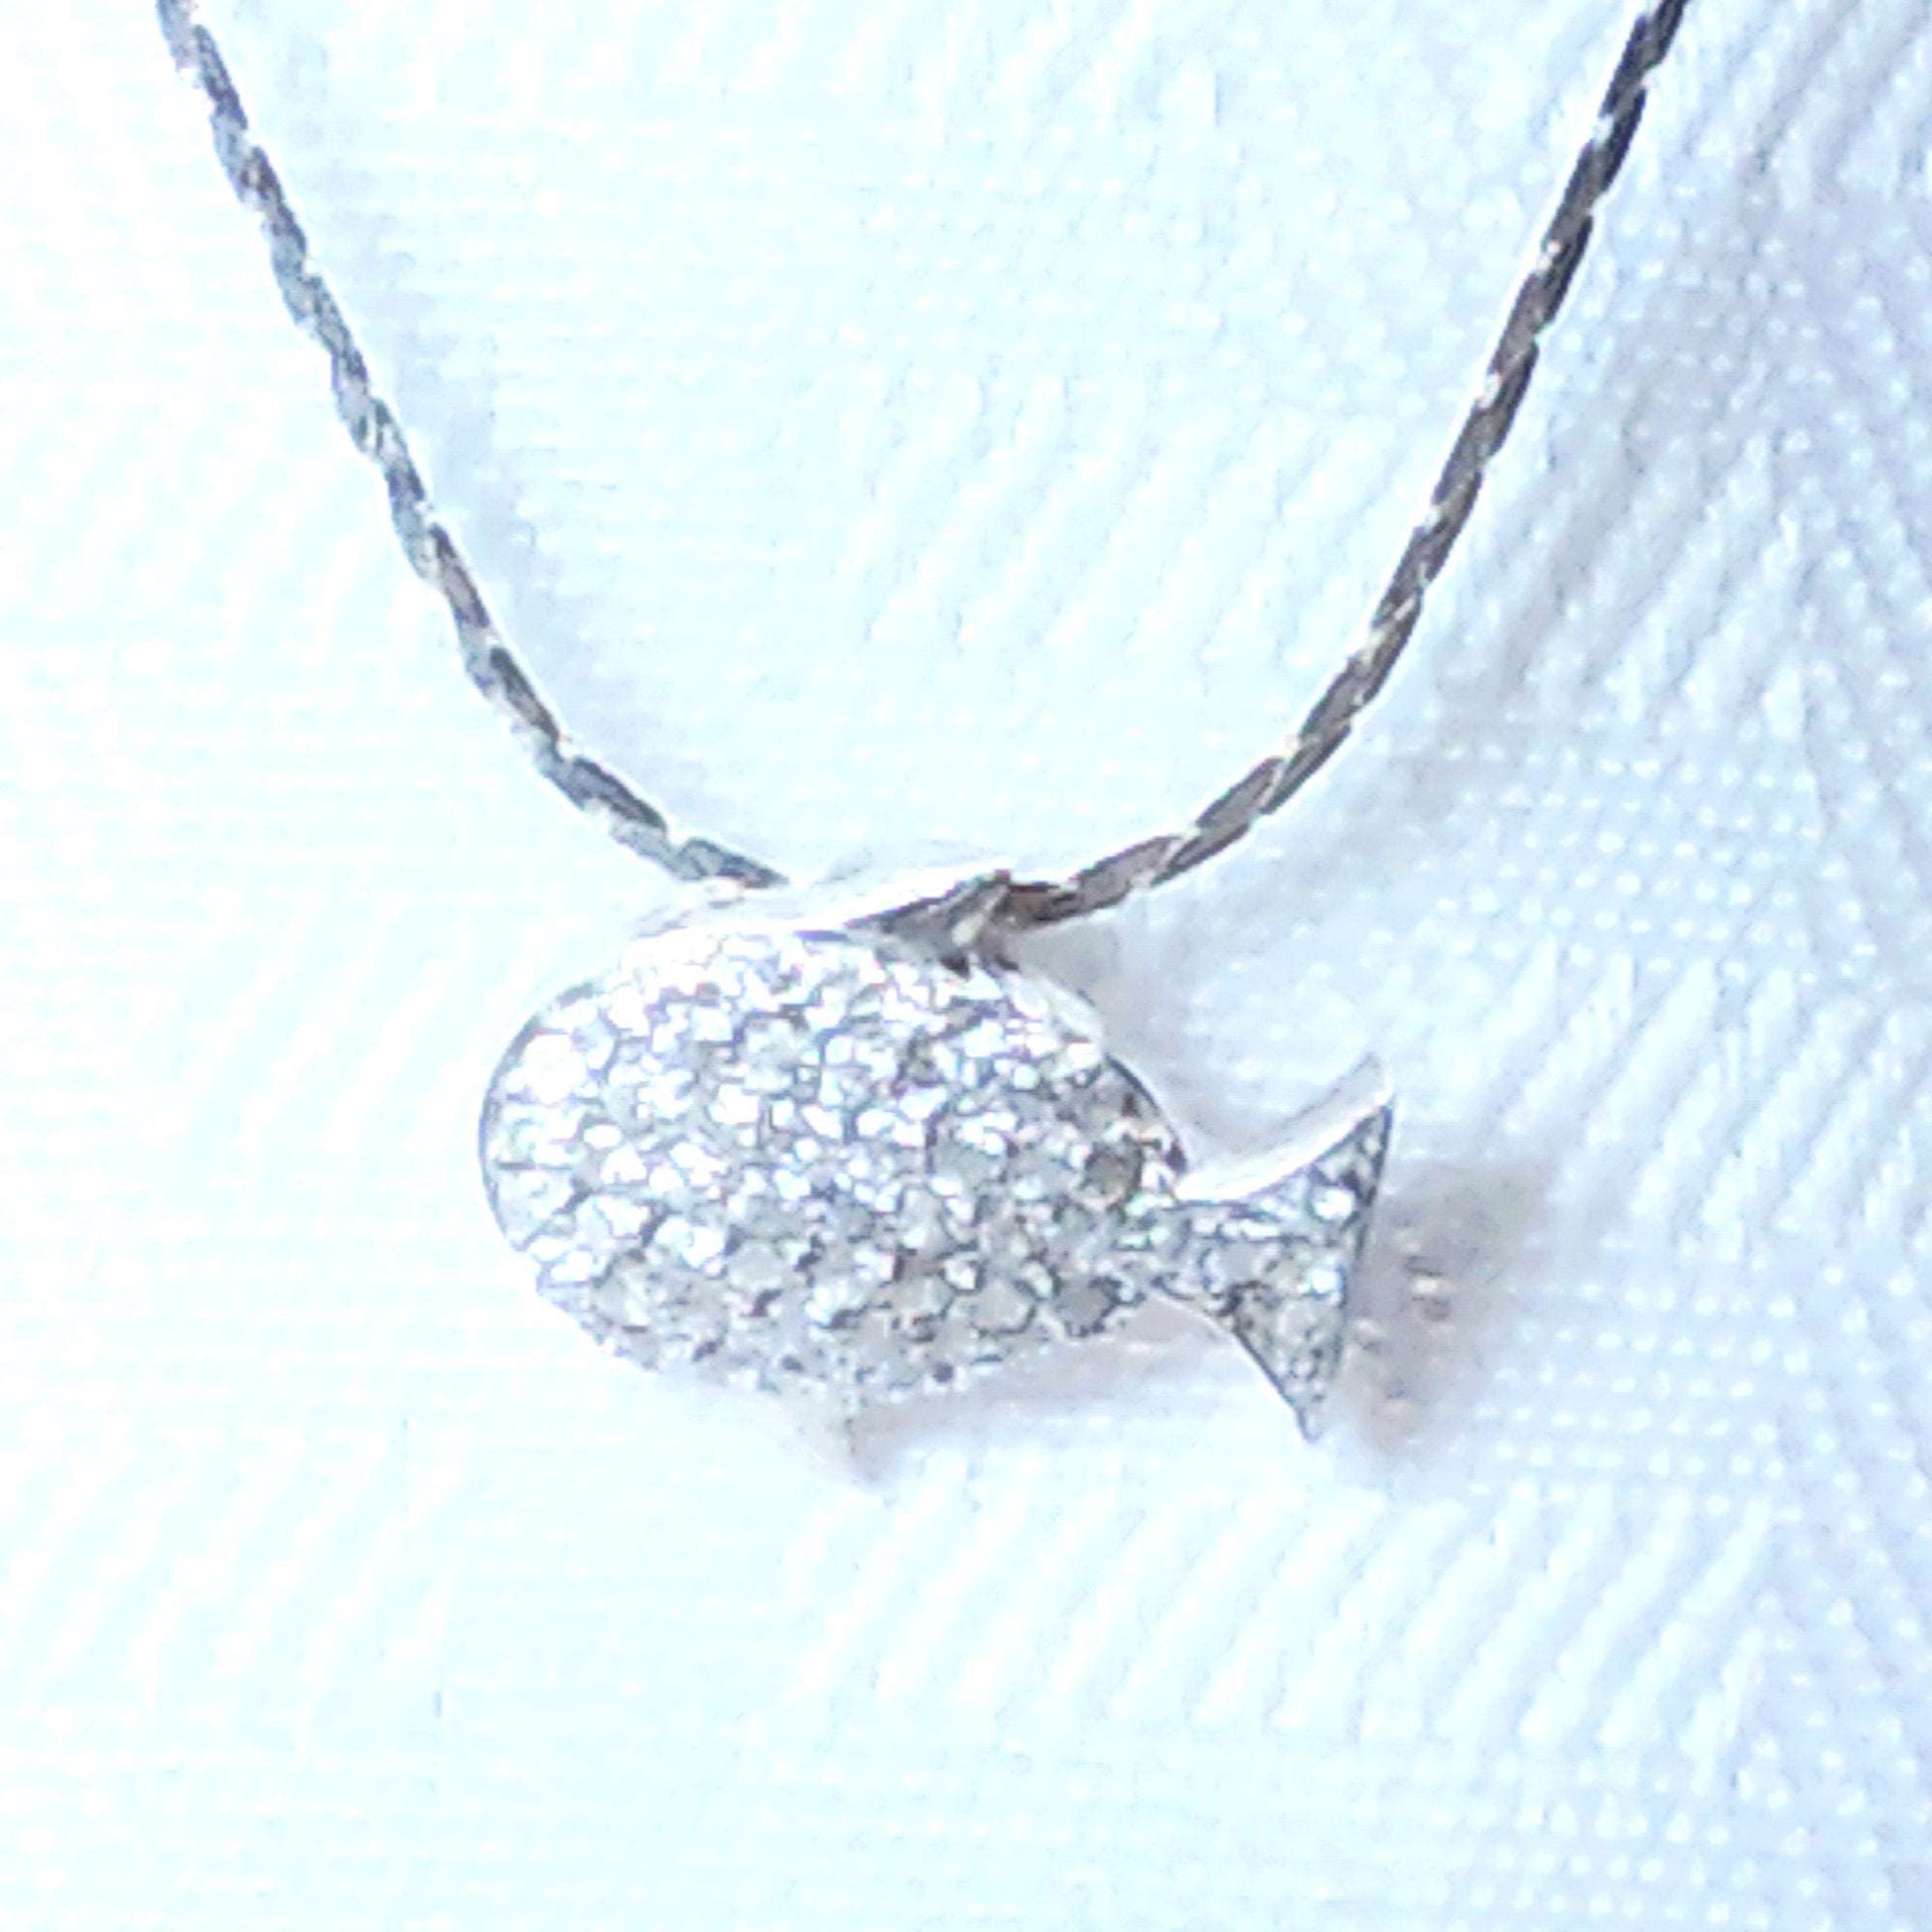 Sterling silver fish pendant with cubic zirconia stones - Providence silver gold jewelry usa